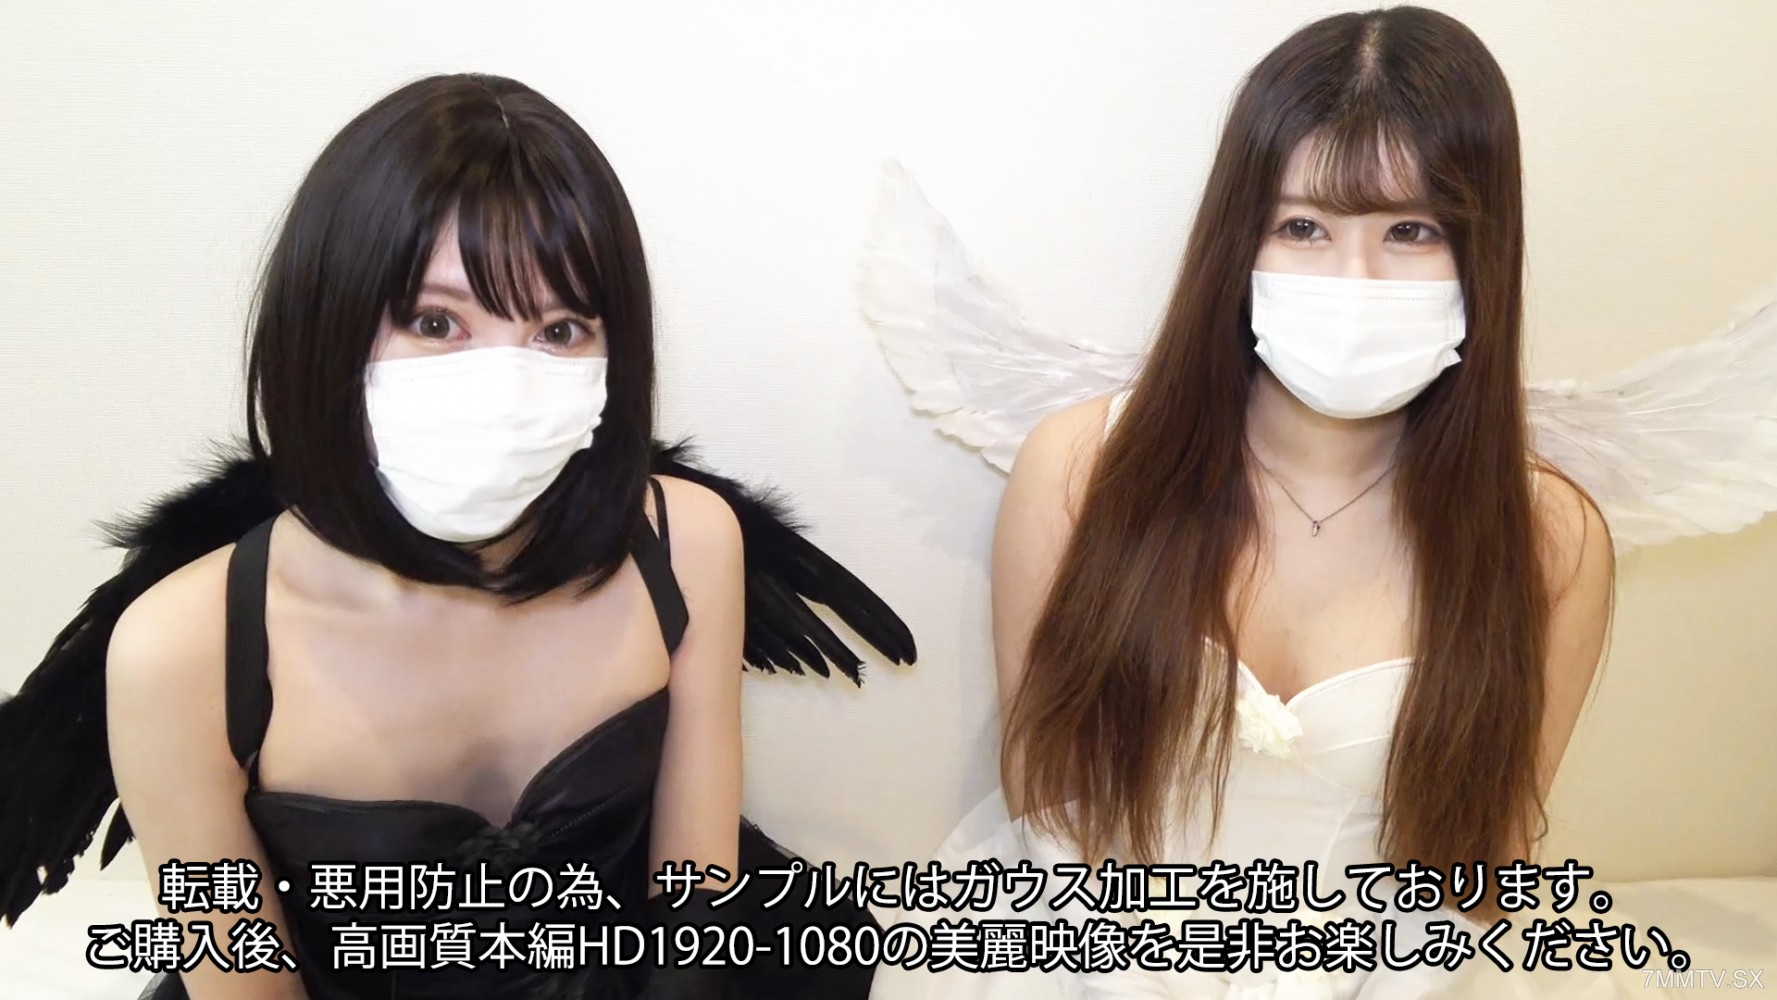 FC2-PPV-3983342 [Ejaculation 4th] Continuous creampie! Completed all works of old customers [premature ejaculation woman, thank you thank you! Seragyu Yomansho's New Year's Clothes, Two Individuals' Corner Start-up, Service Splays